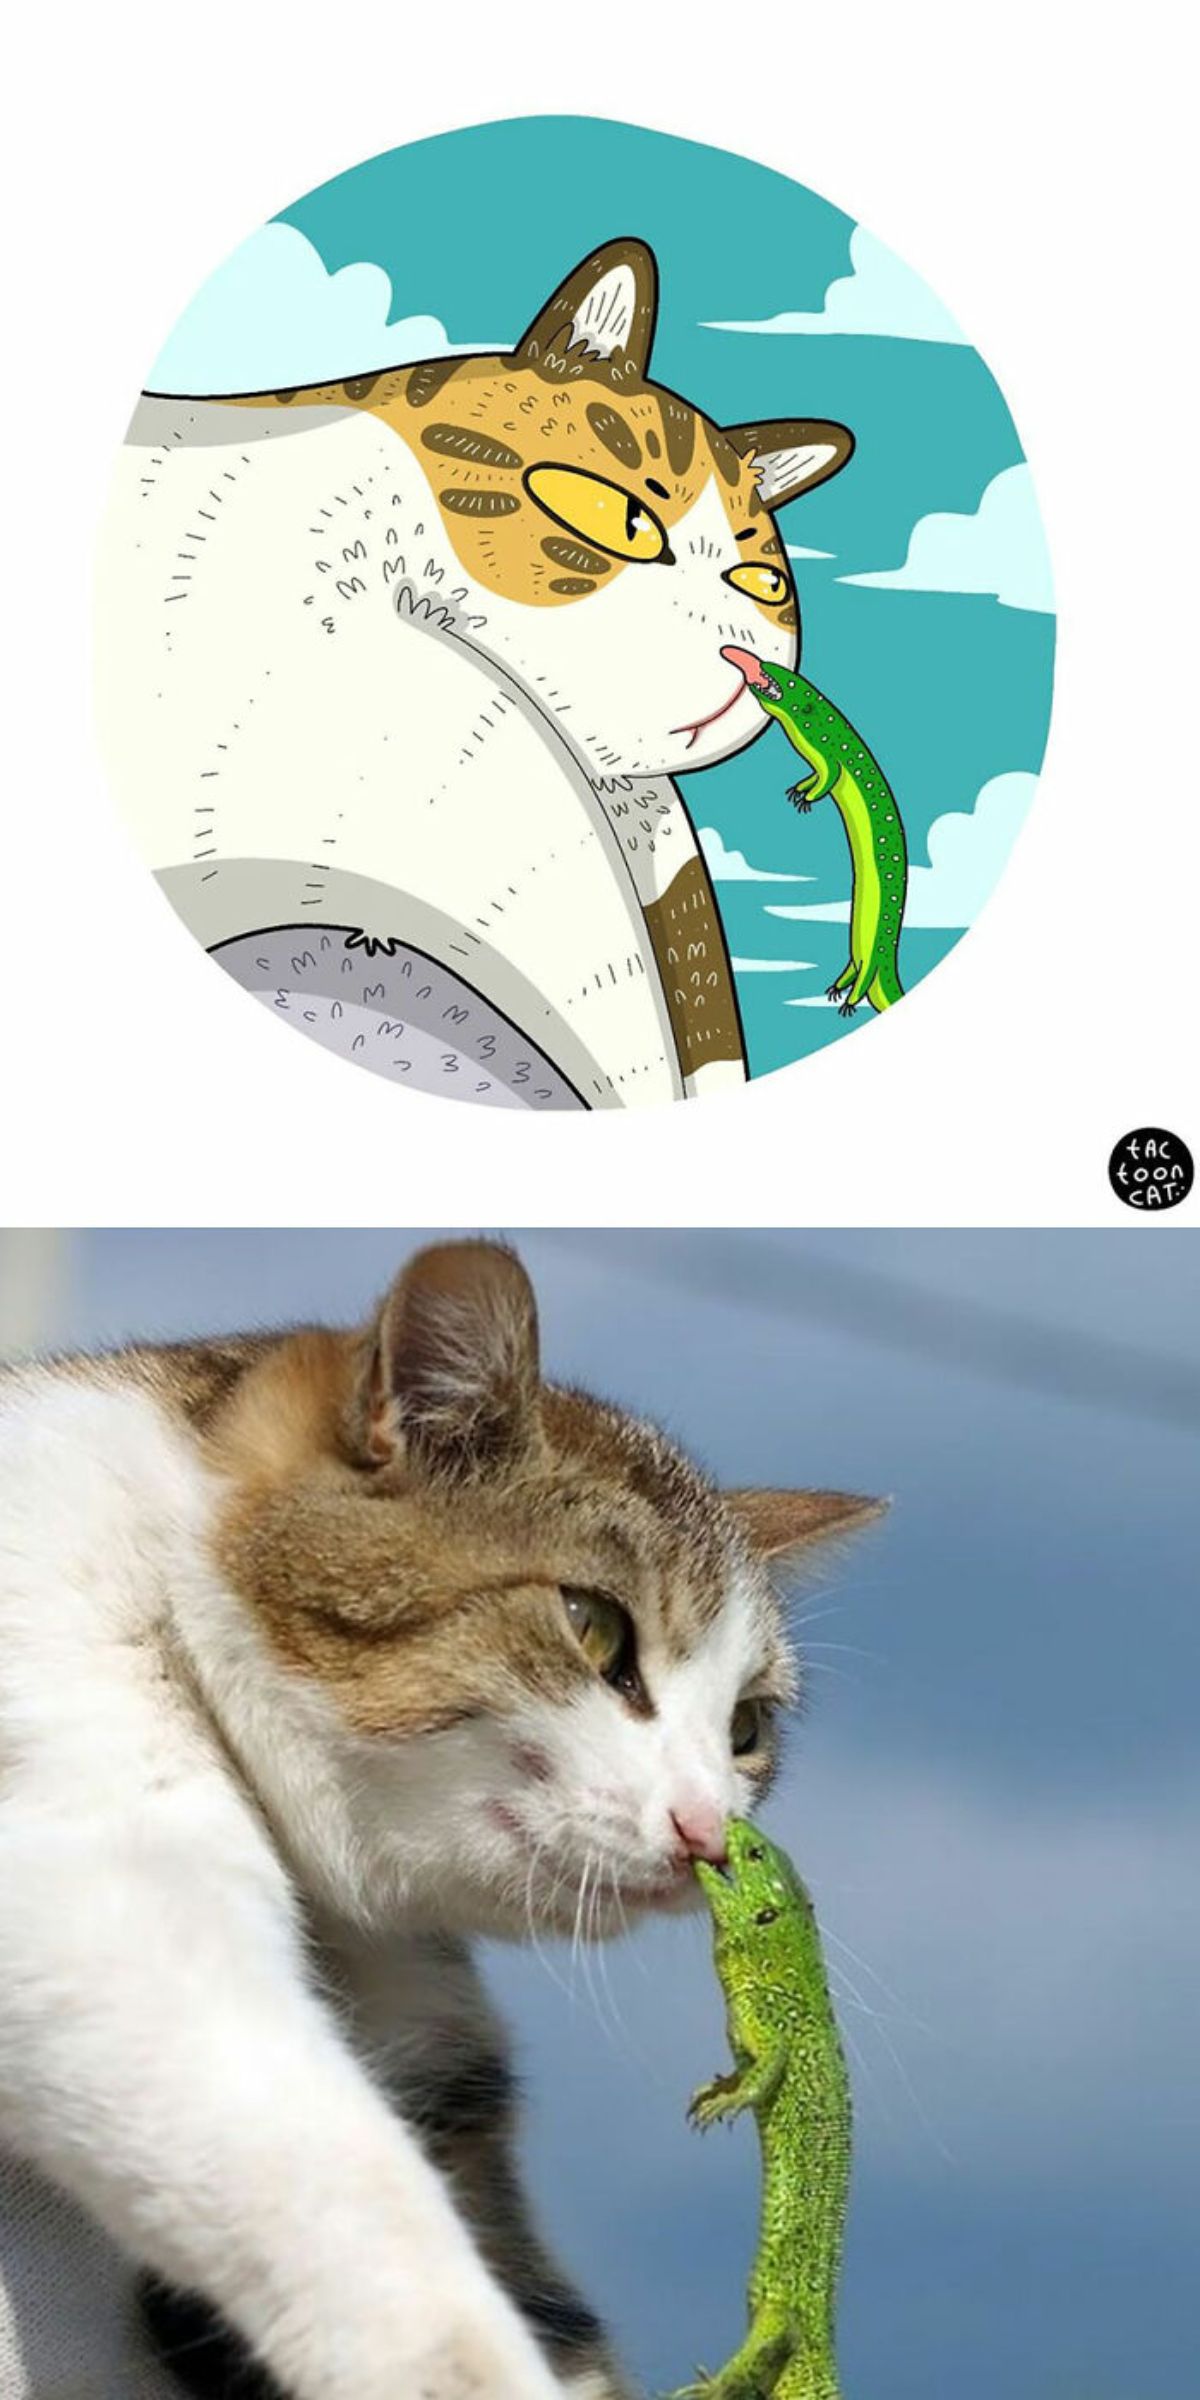 cartoon photo and real photo of a brown and white tabby with a small green lizard hanging off of the cat's mouth